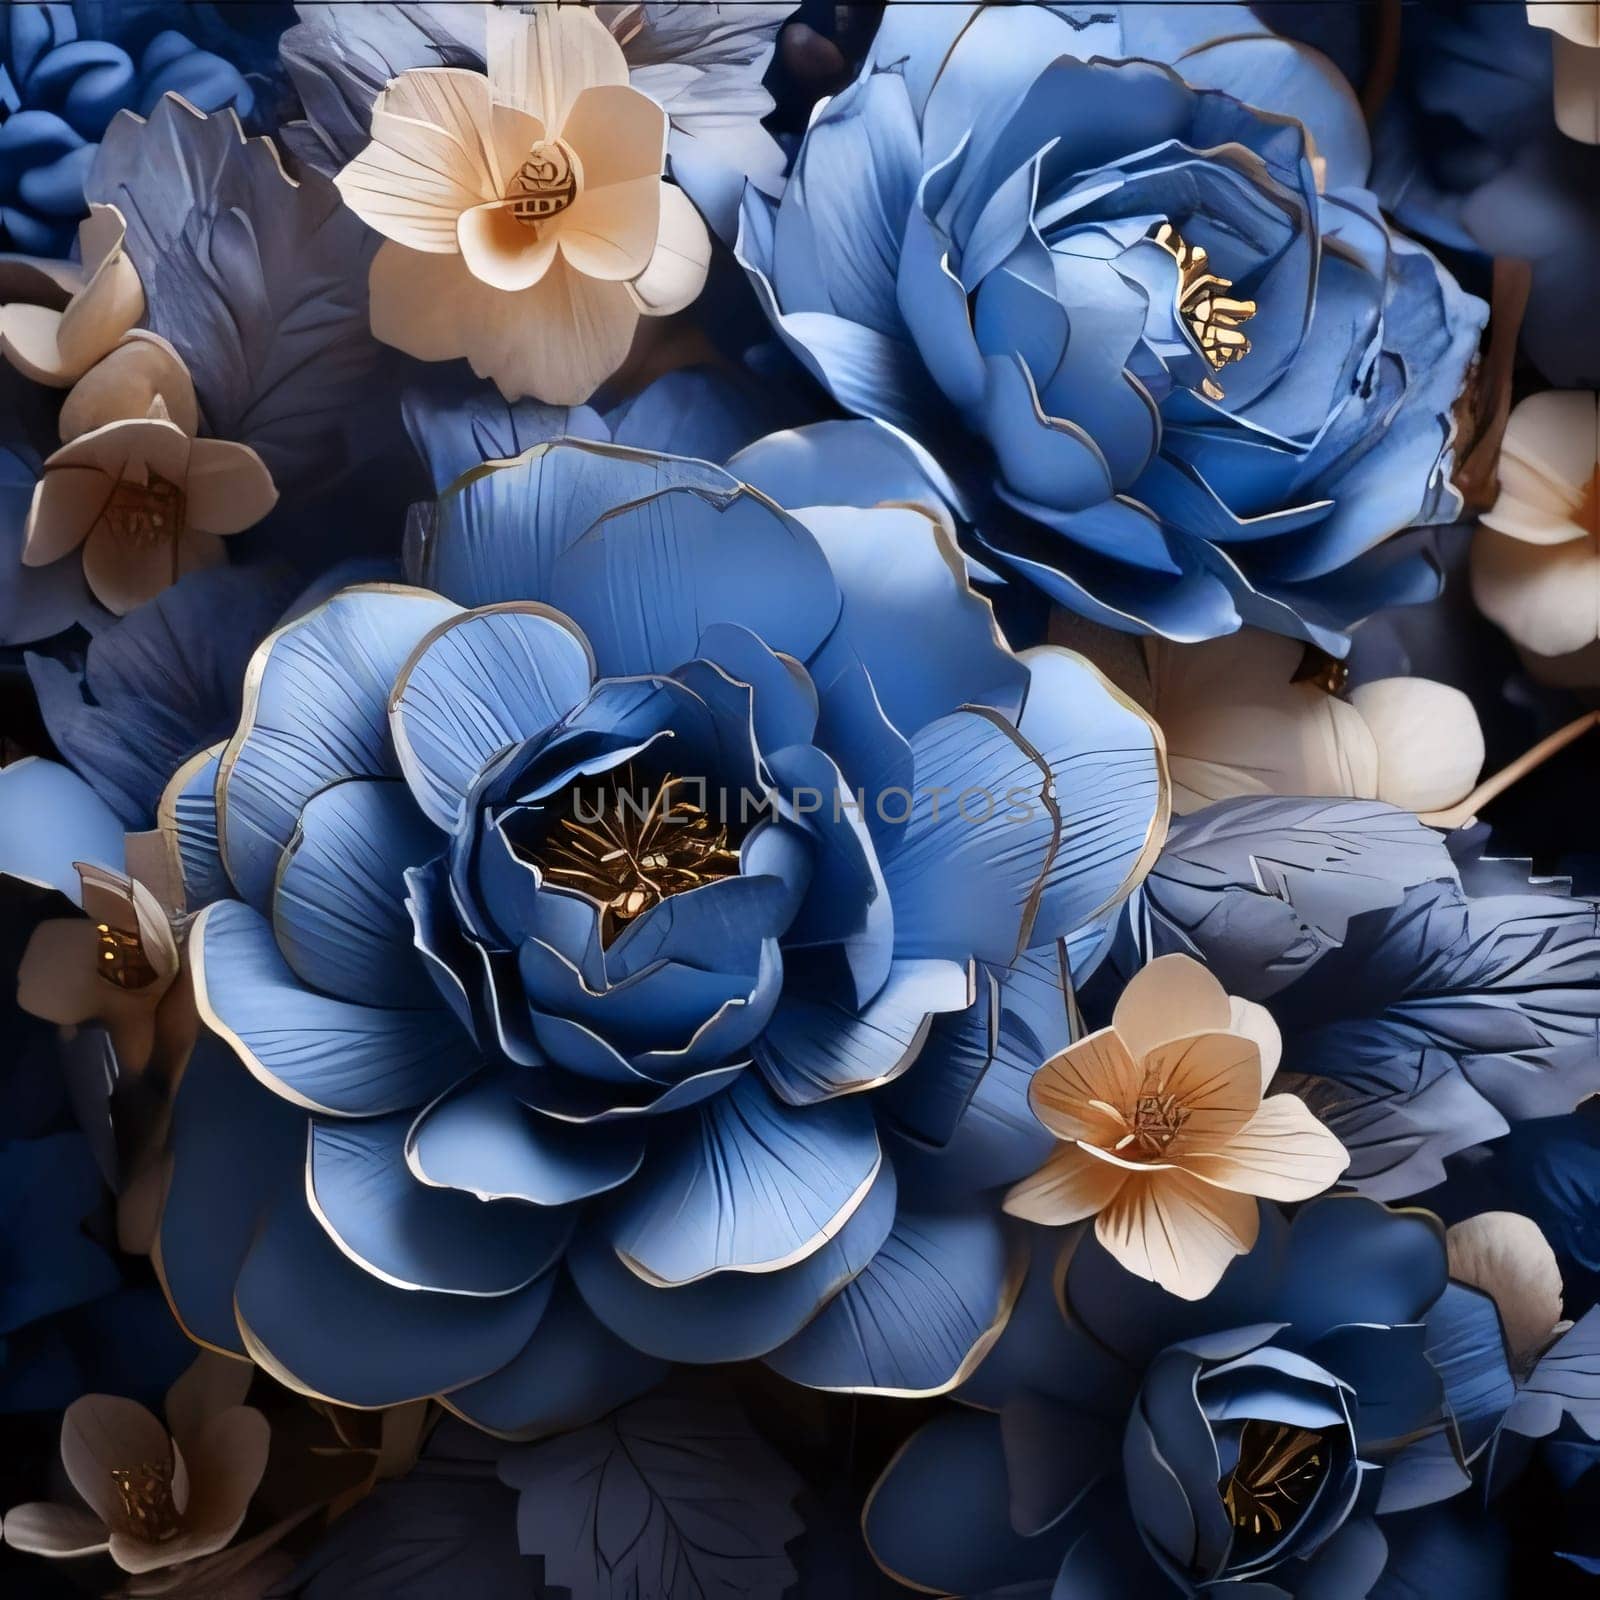 Blue hydrangea flower, top view. Flowering flowers, a symbol of spring, new life. A joyful time of nature waking up to life.